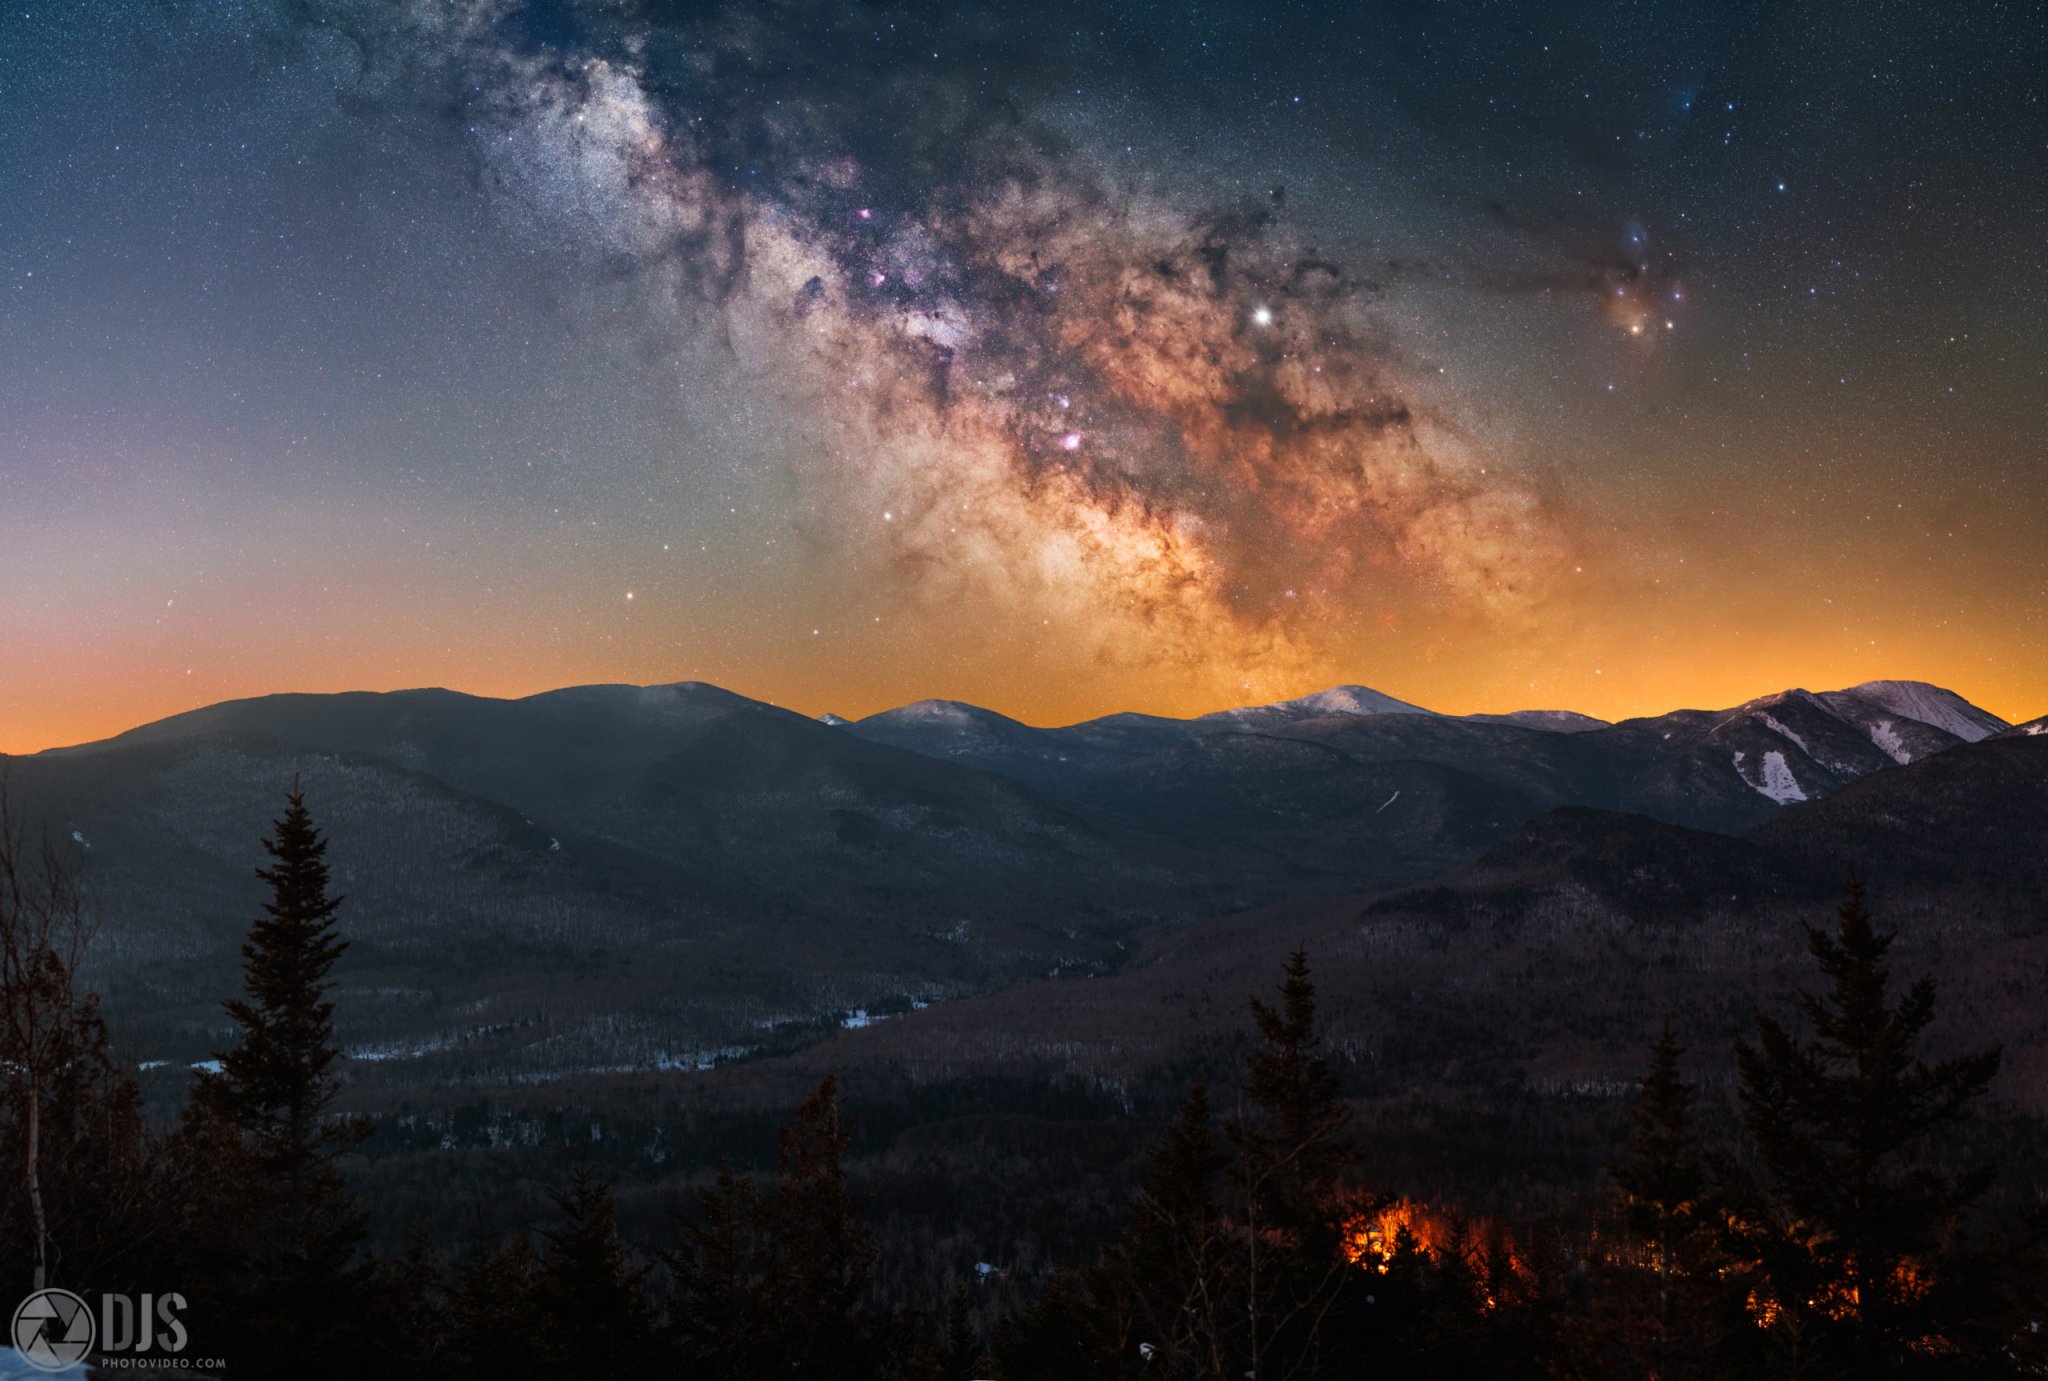 Daniel Stein Does Beautiful AstroPhotography on Film and Digital